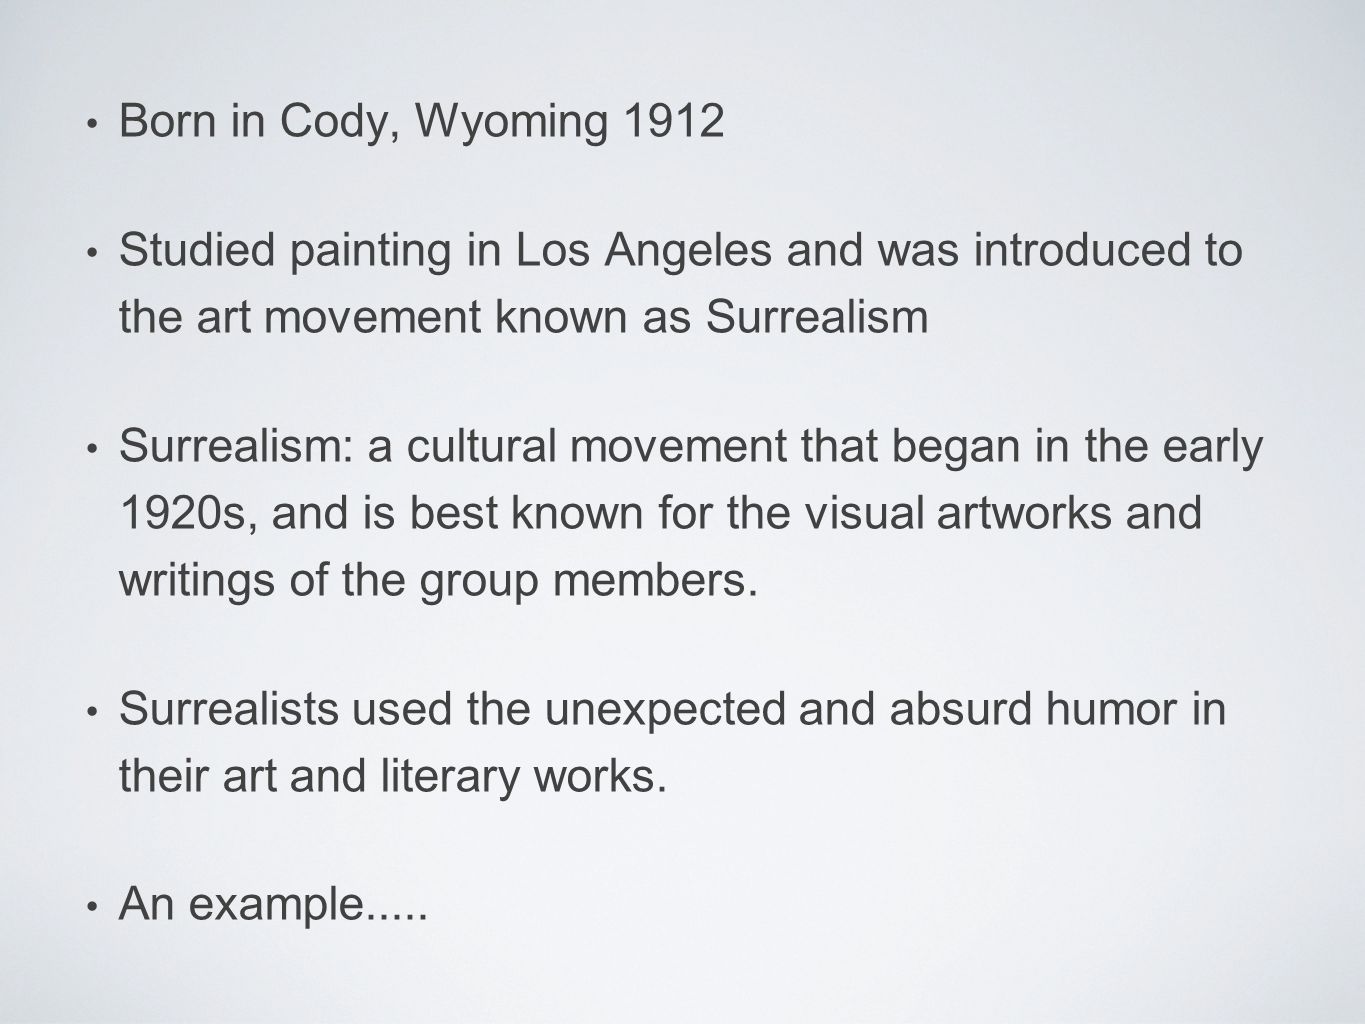 Born in Cody, Wyoming 1912 Studied painting in Los Angeles and was introduced to the art movement known as Surrealism Surrealism: a cultural movement that began in the early 1920s, and is best known for the visual artworks and writings of the group members.